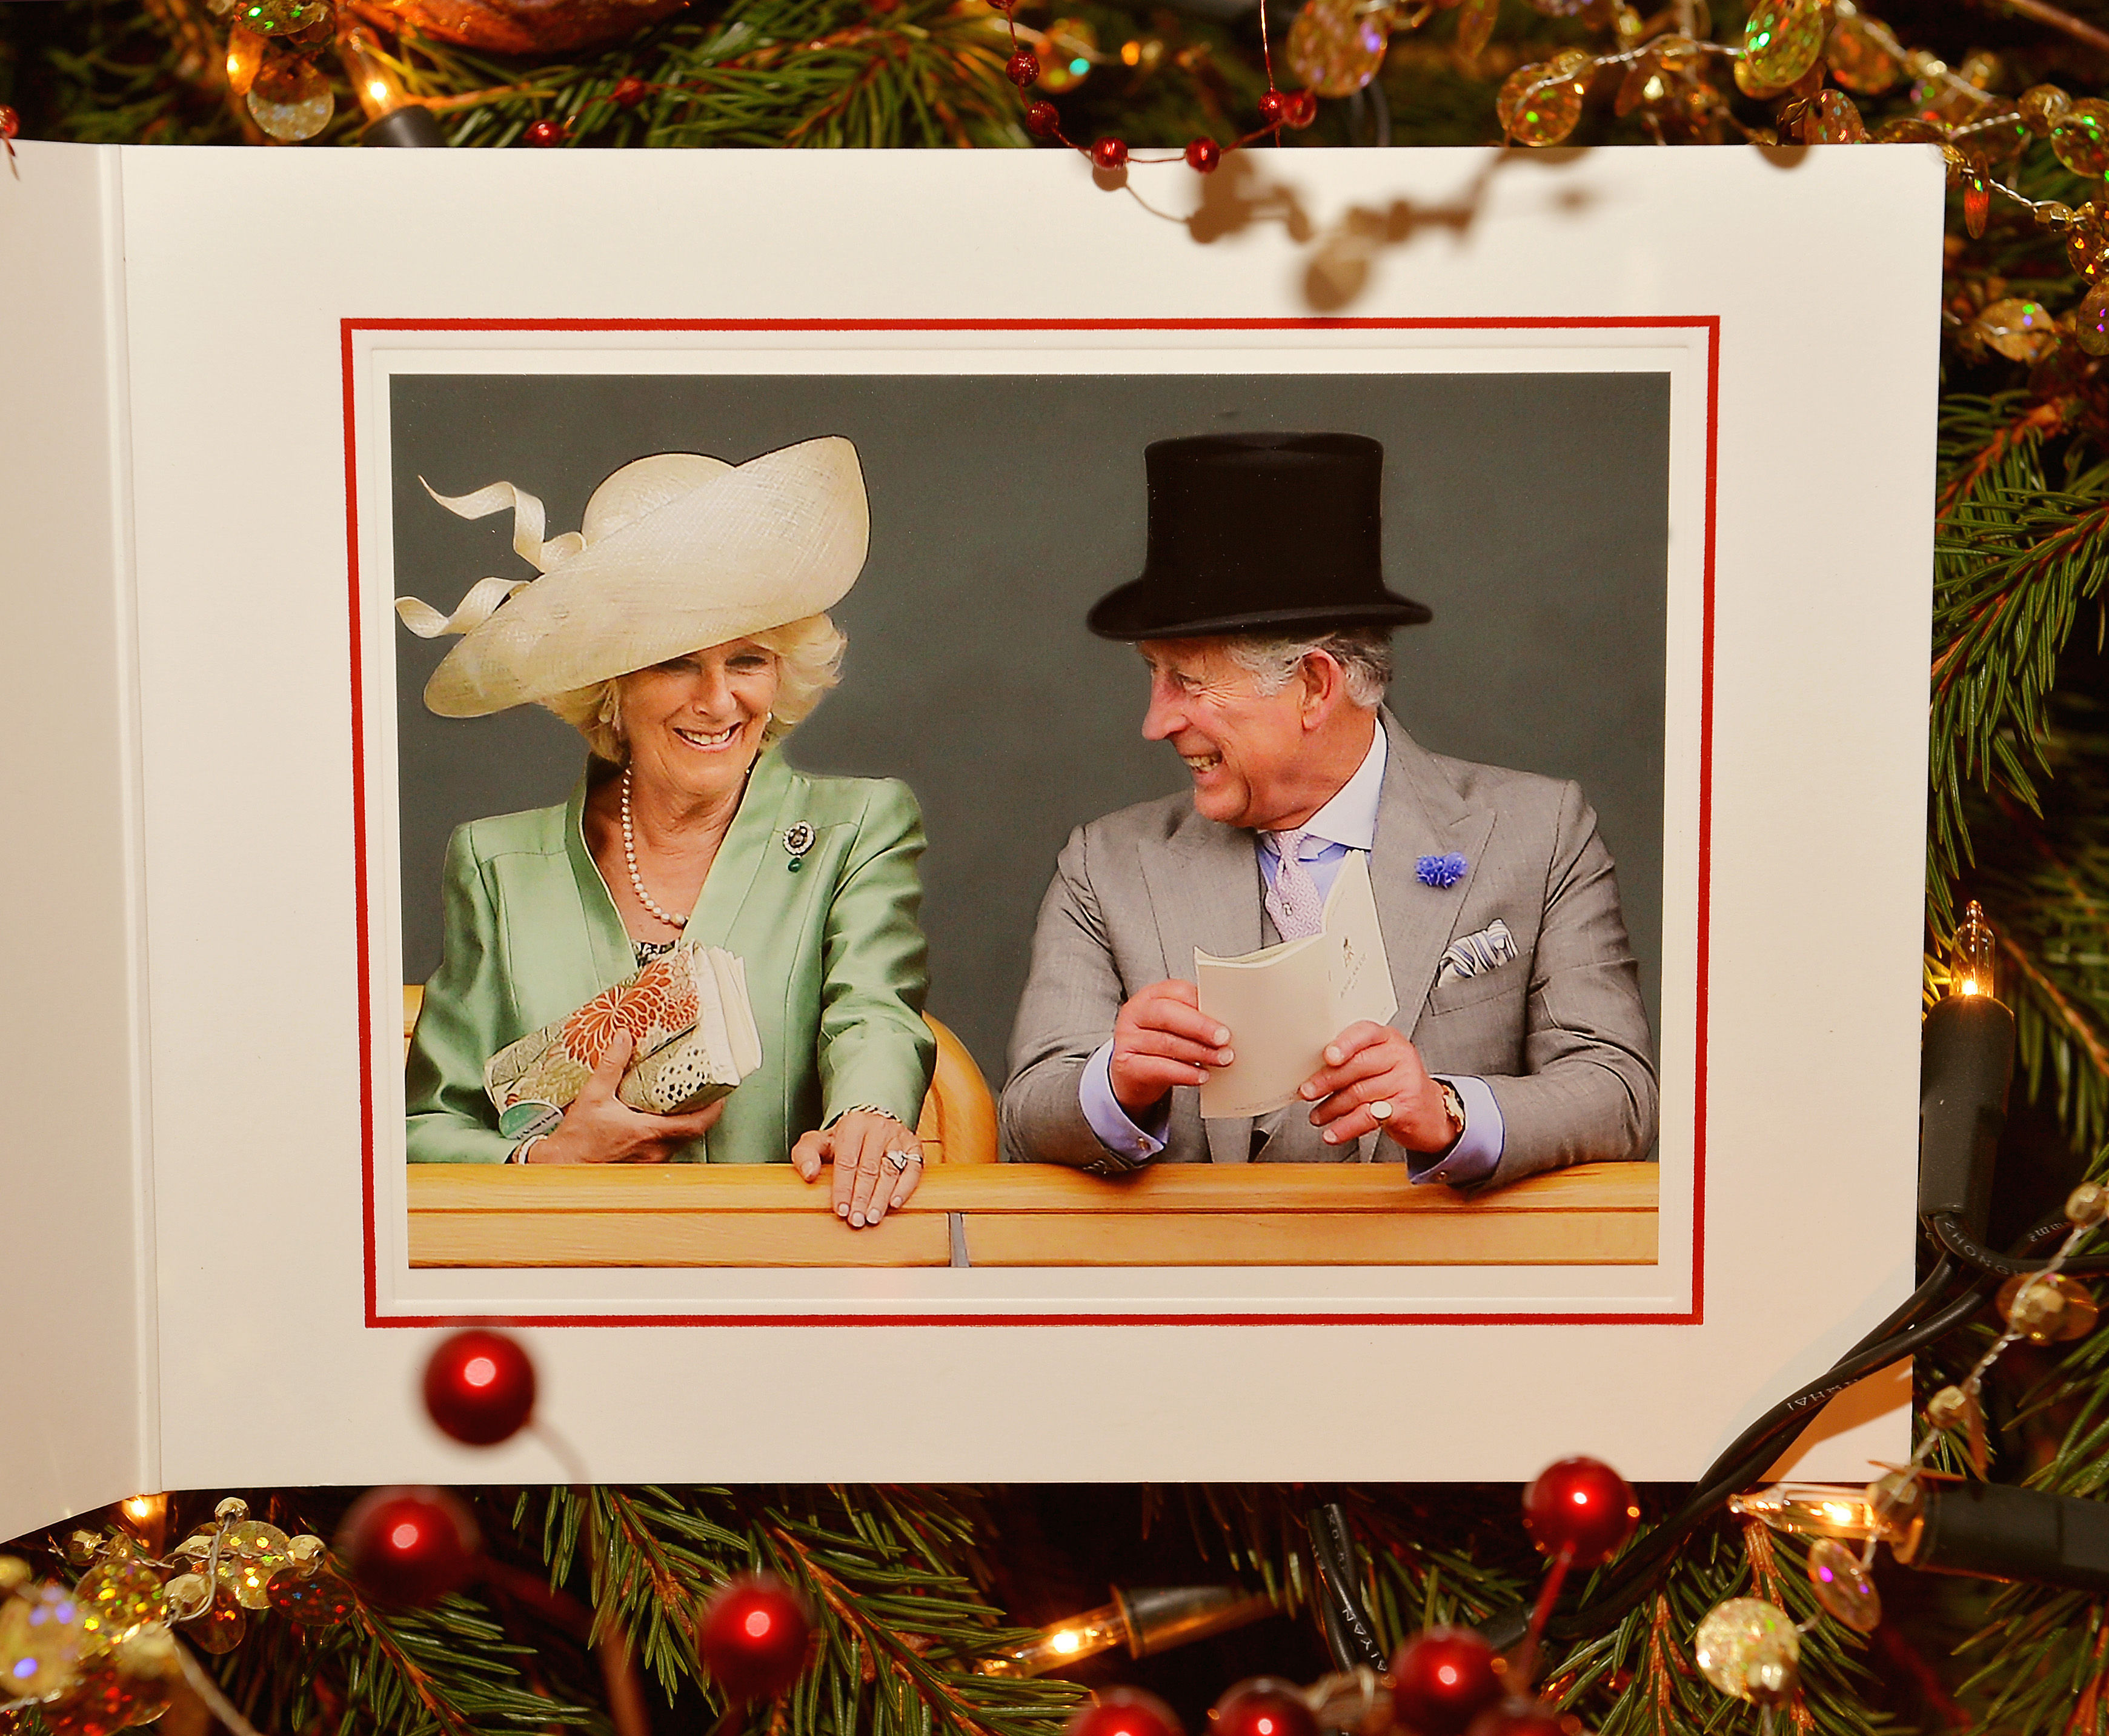 2013 Royal Christmas Card. Prince Charles and Camilla, Duchess of Cornwall on the second day of Royal Ascot on June 19, 2013.